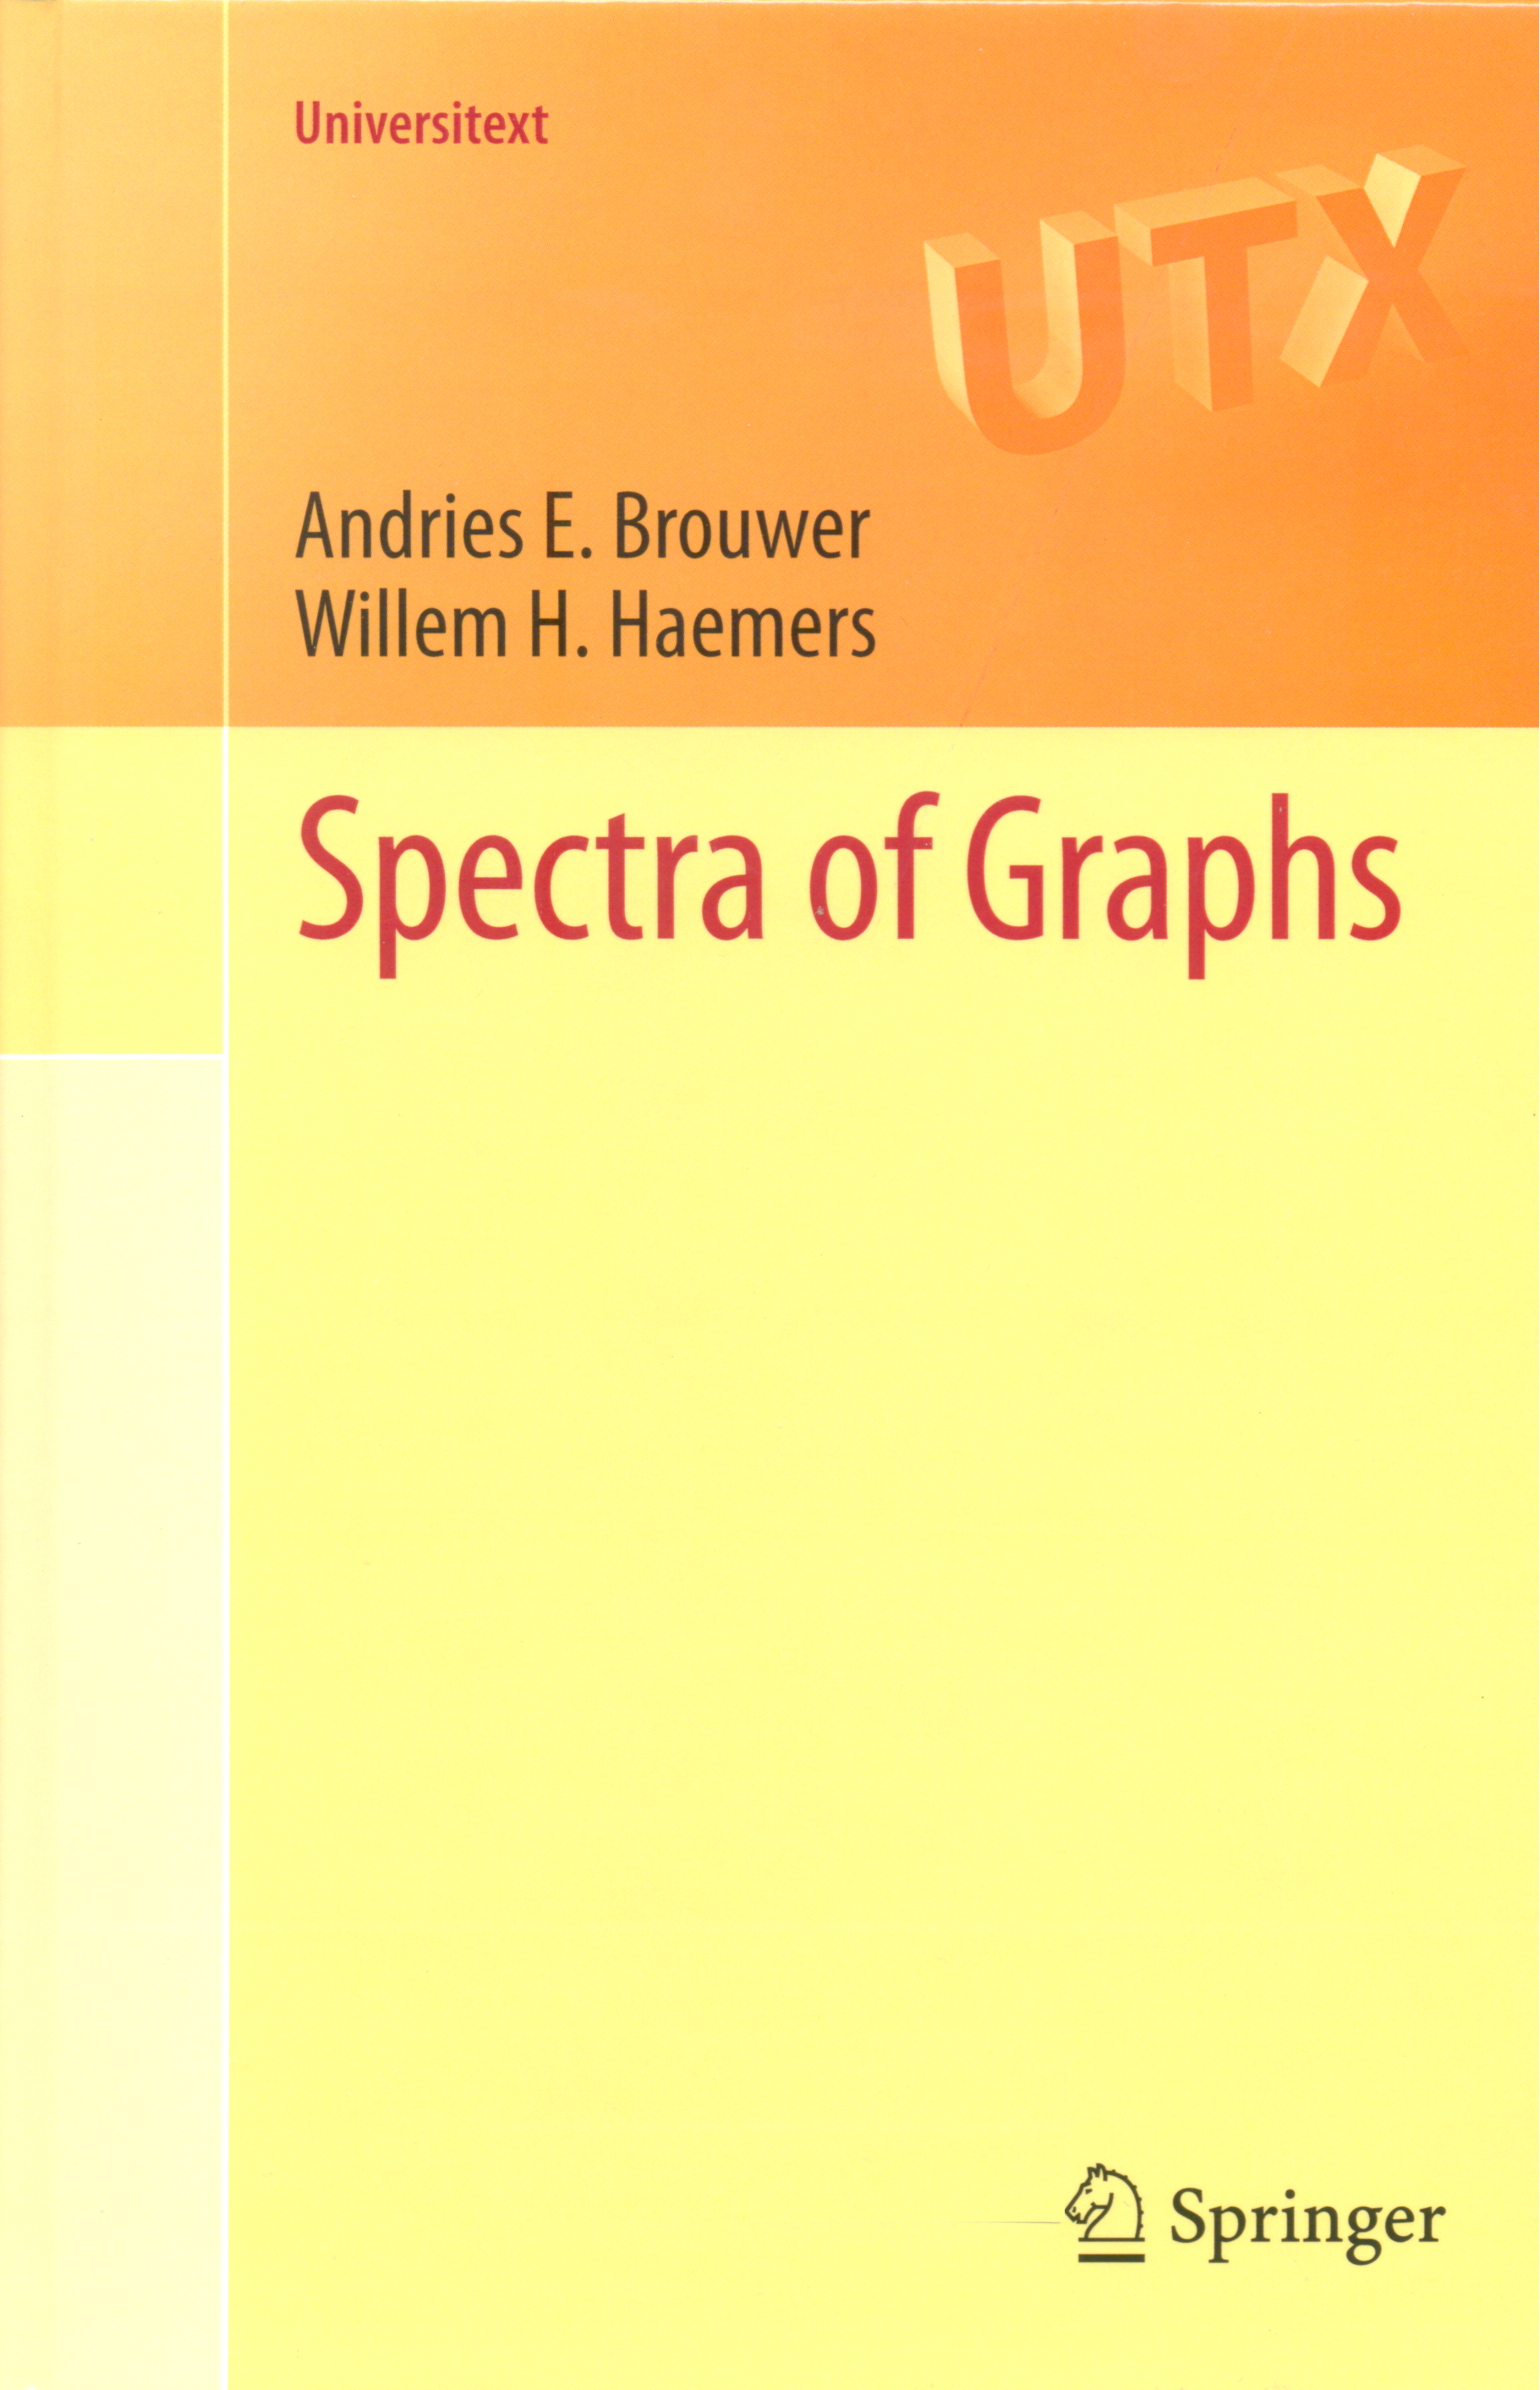 Spectra of graphs / Andries E. Brouwer, Willem H. Haemers